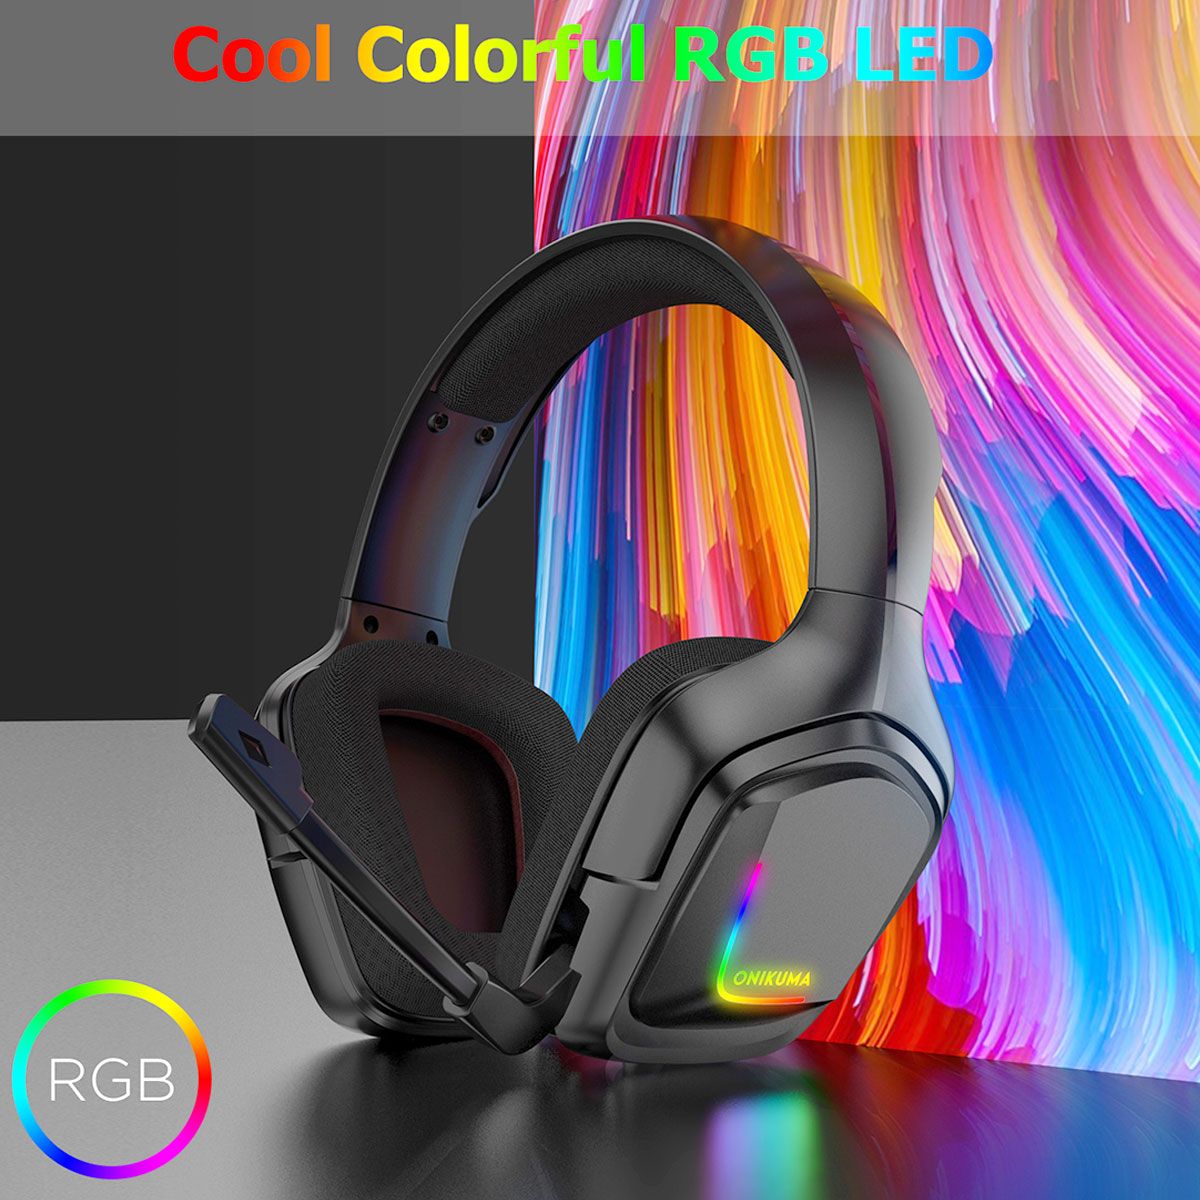 ONIKUMA-K20-RGB-LED-Light-Gaming-Headphone-Stereo-Noise-Reduction-Wired-Earphone-With-Mic-for-PS4-Xb-1574981